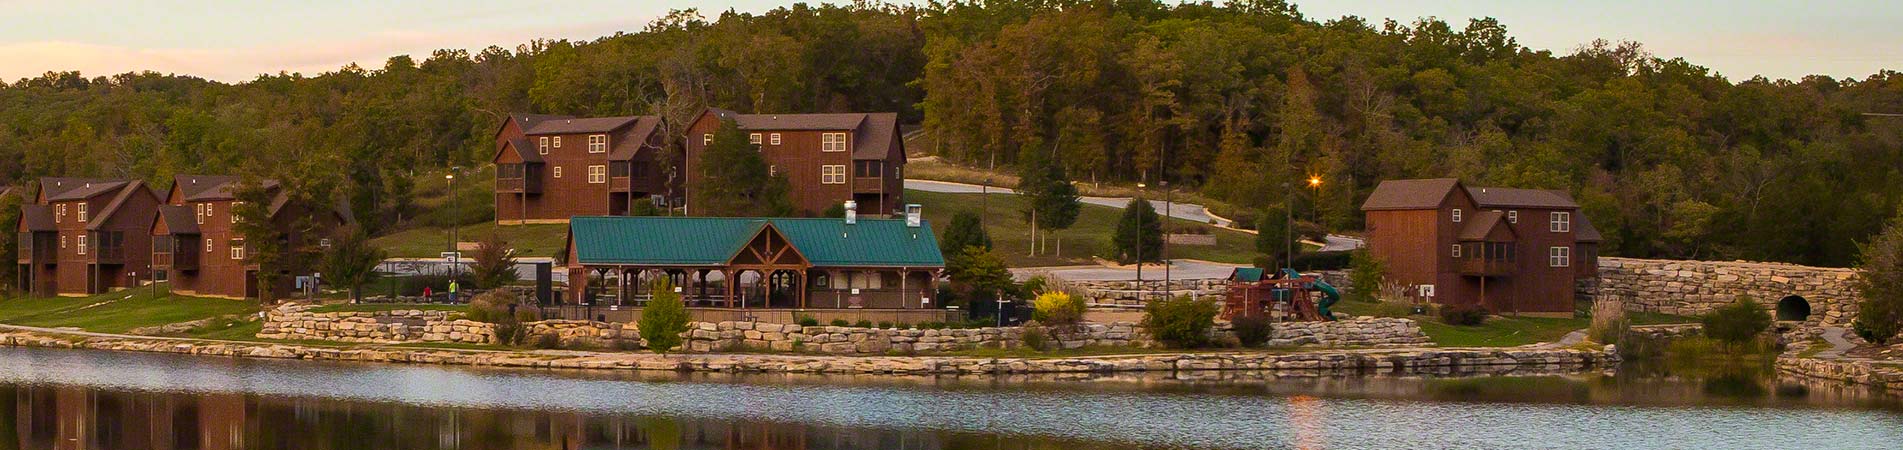 A small lakeside community filled with Branson vacation rentals.